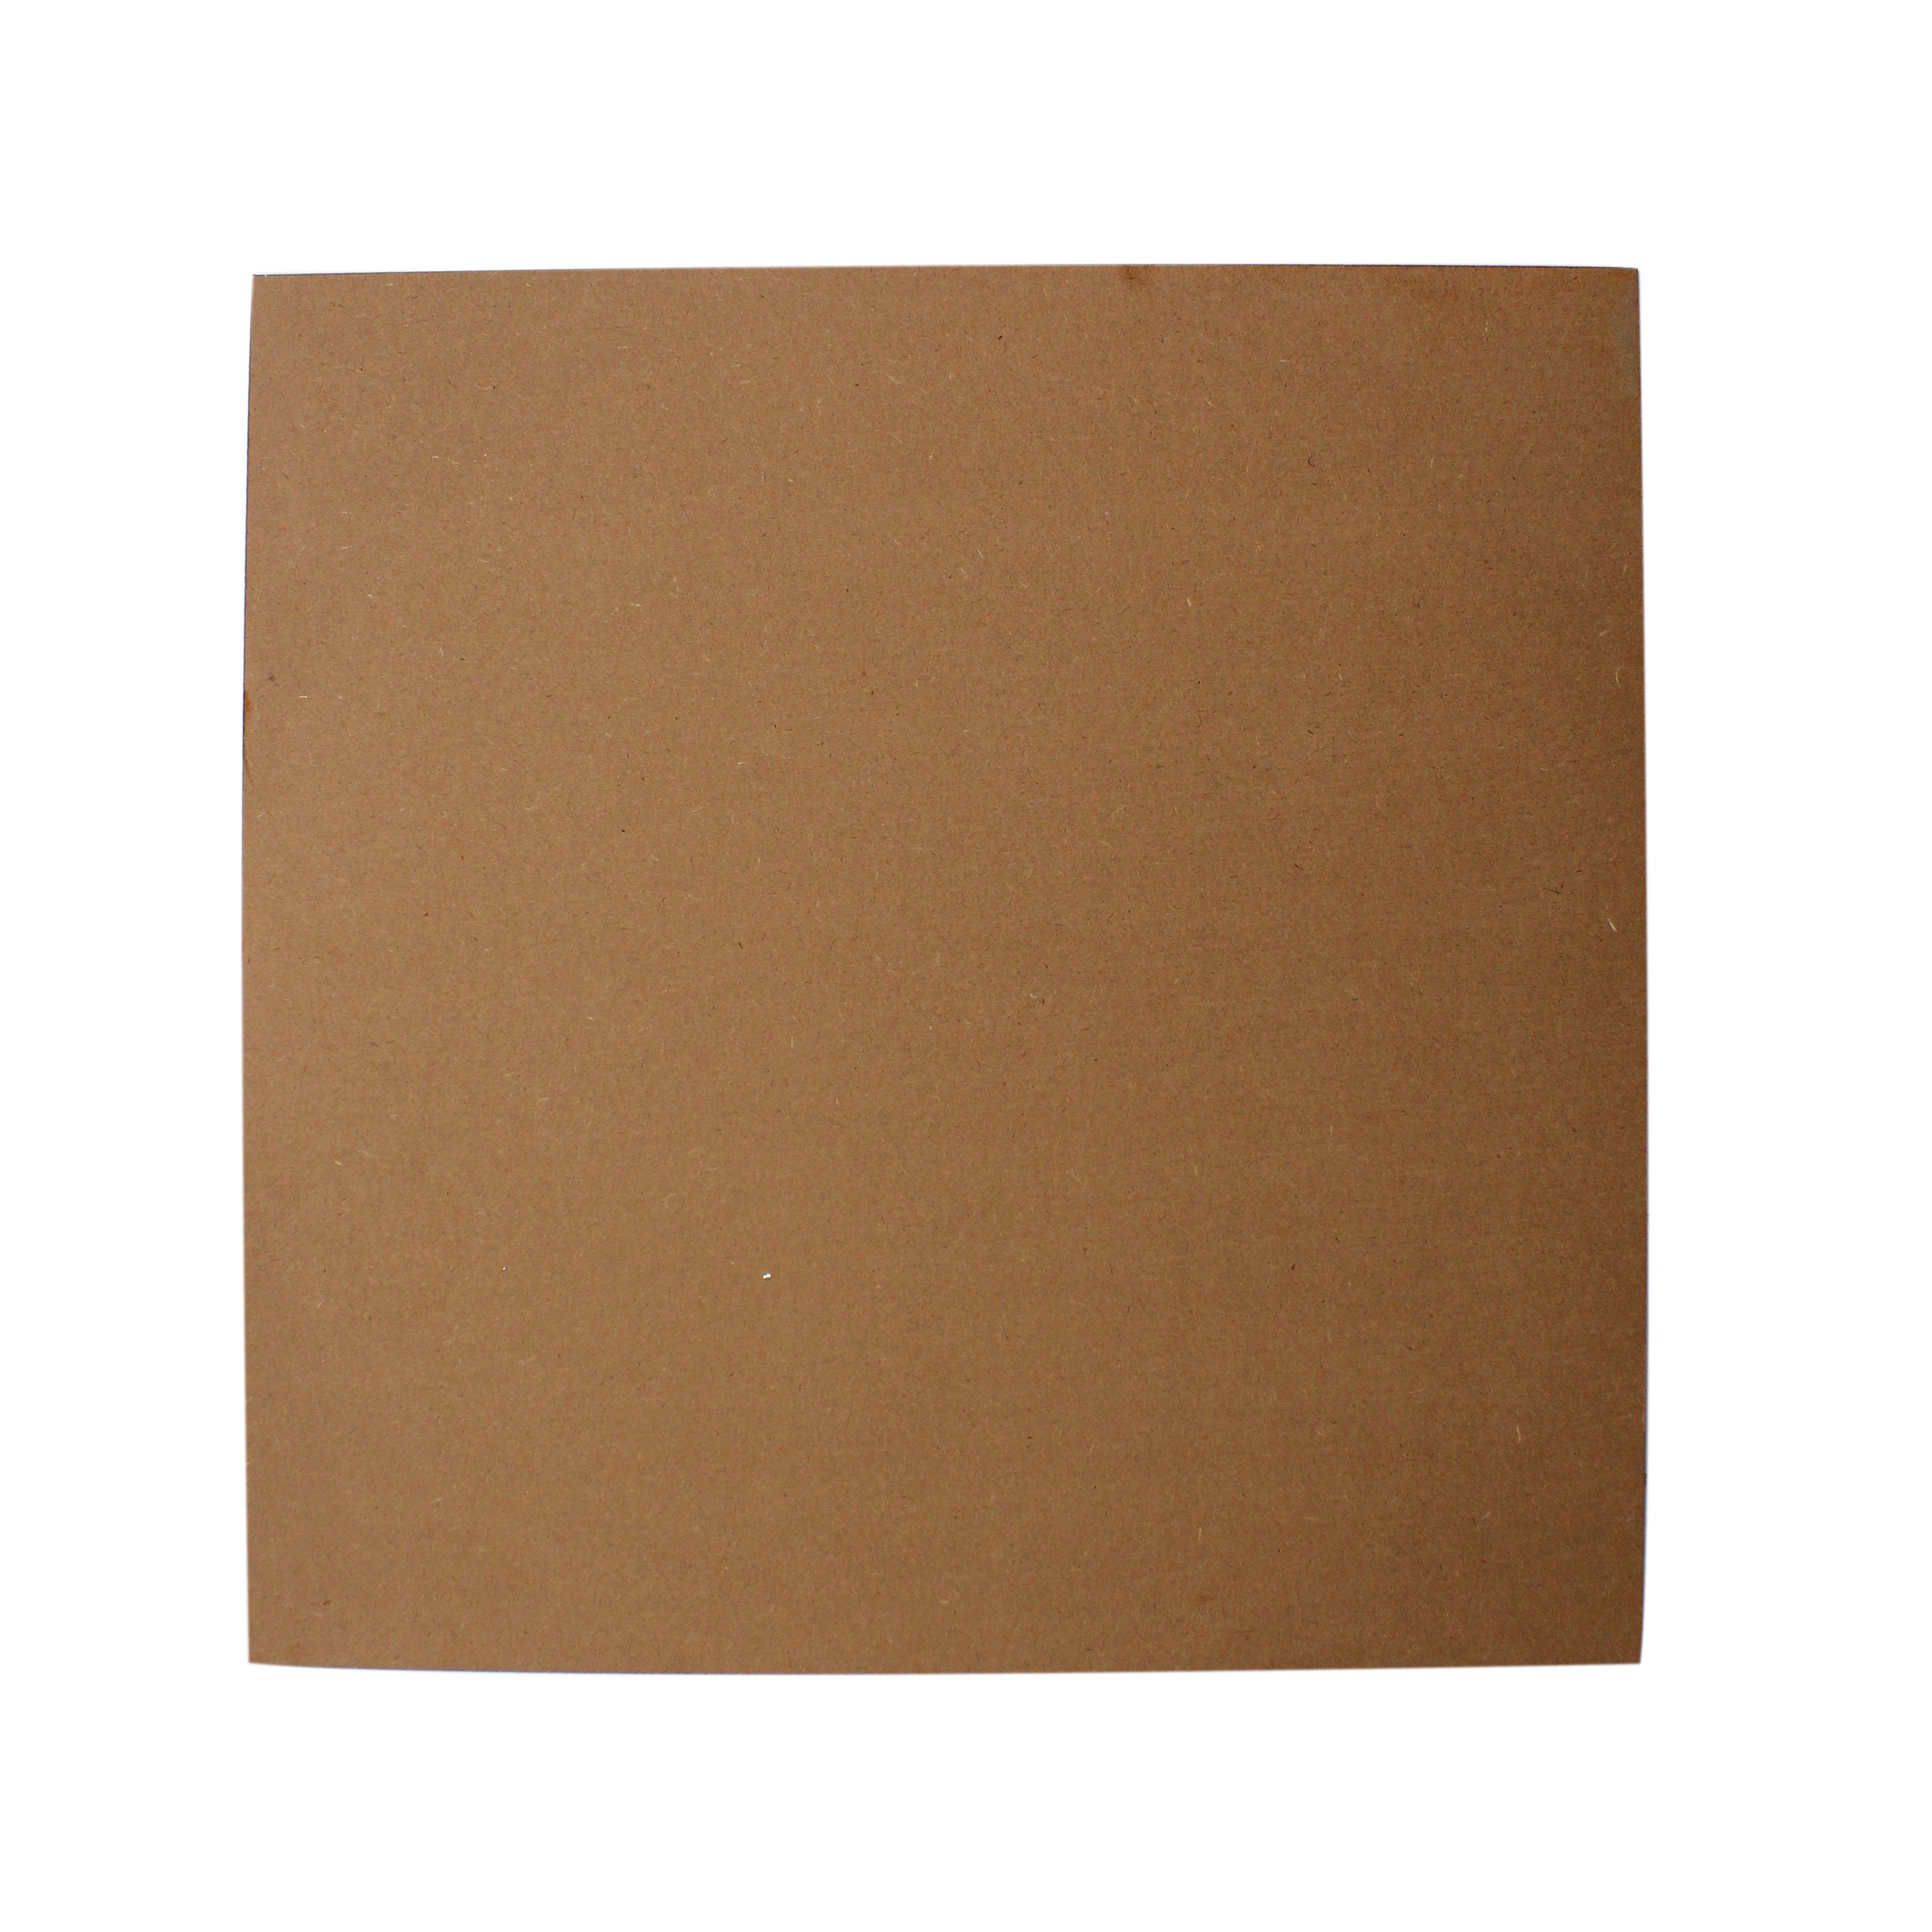 Mdf Blank Squre 18 X 18Inch 5Mm Thick 1Pc Lb